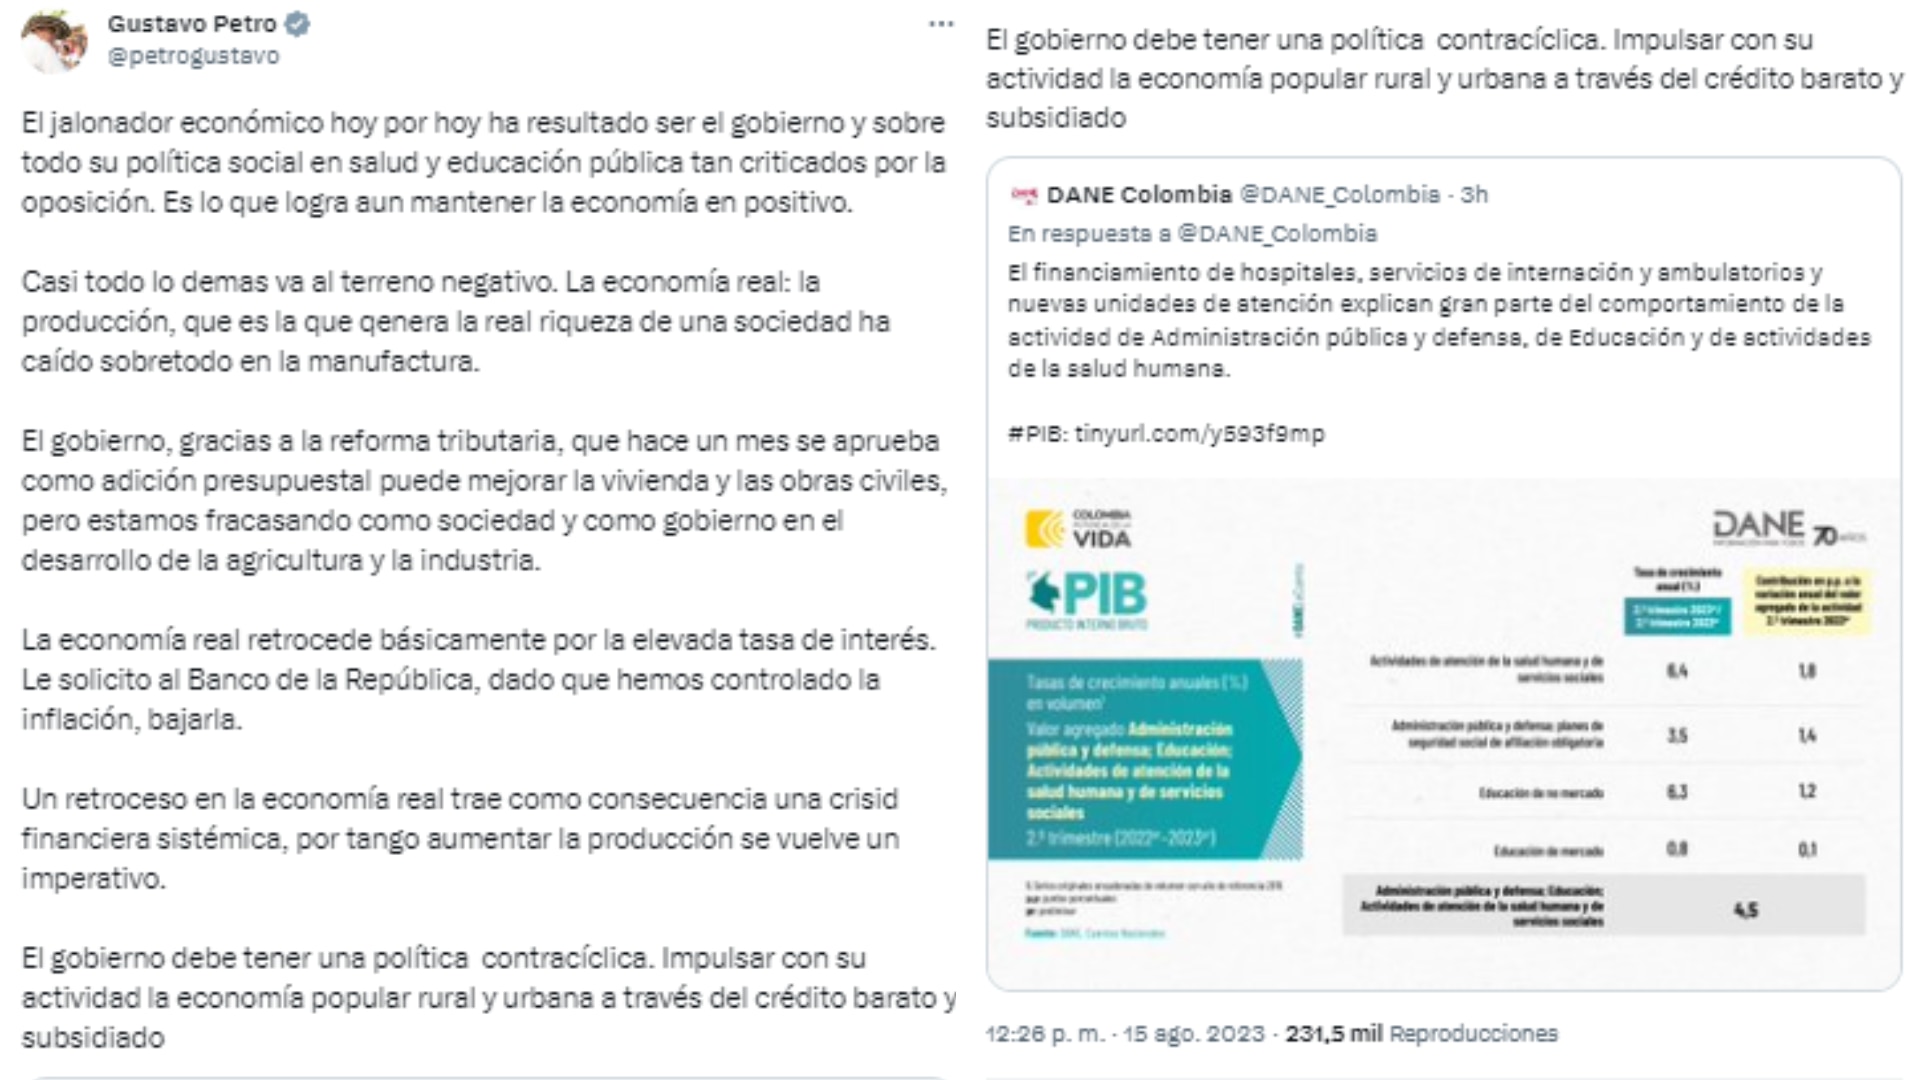 President Gustavo Petro asked the Banco de la República, through his X (Twitter) account, to reduce interest rates to offset the impact on the real economy.  Photo: Twitter.